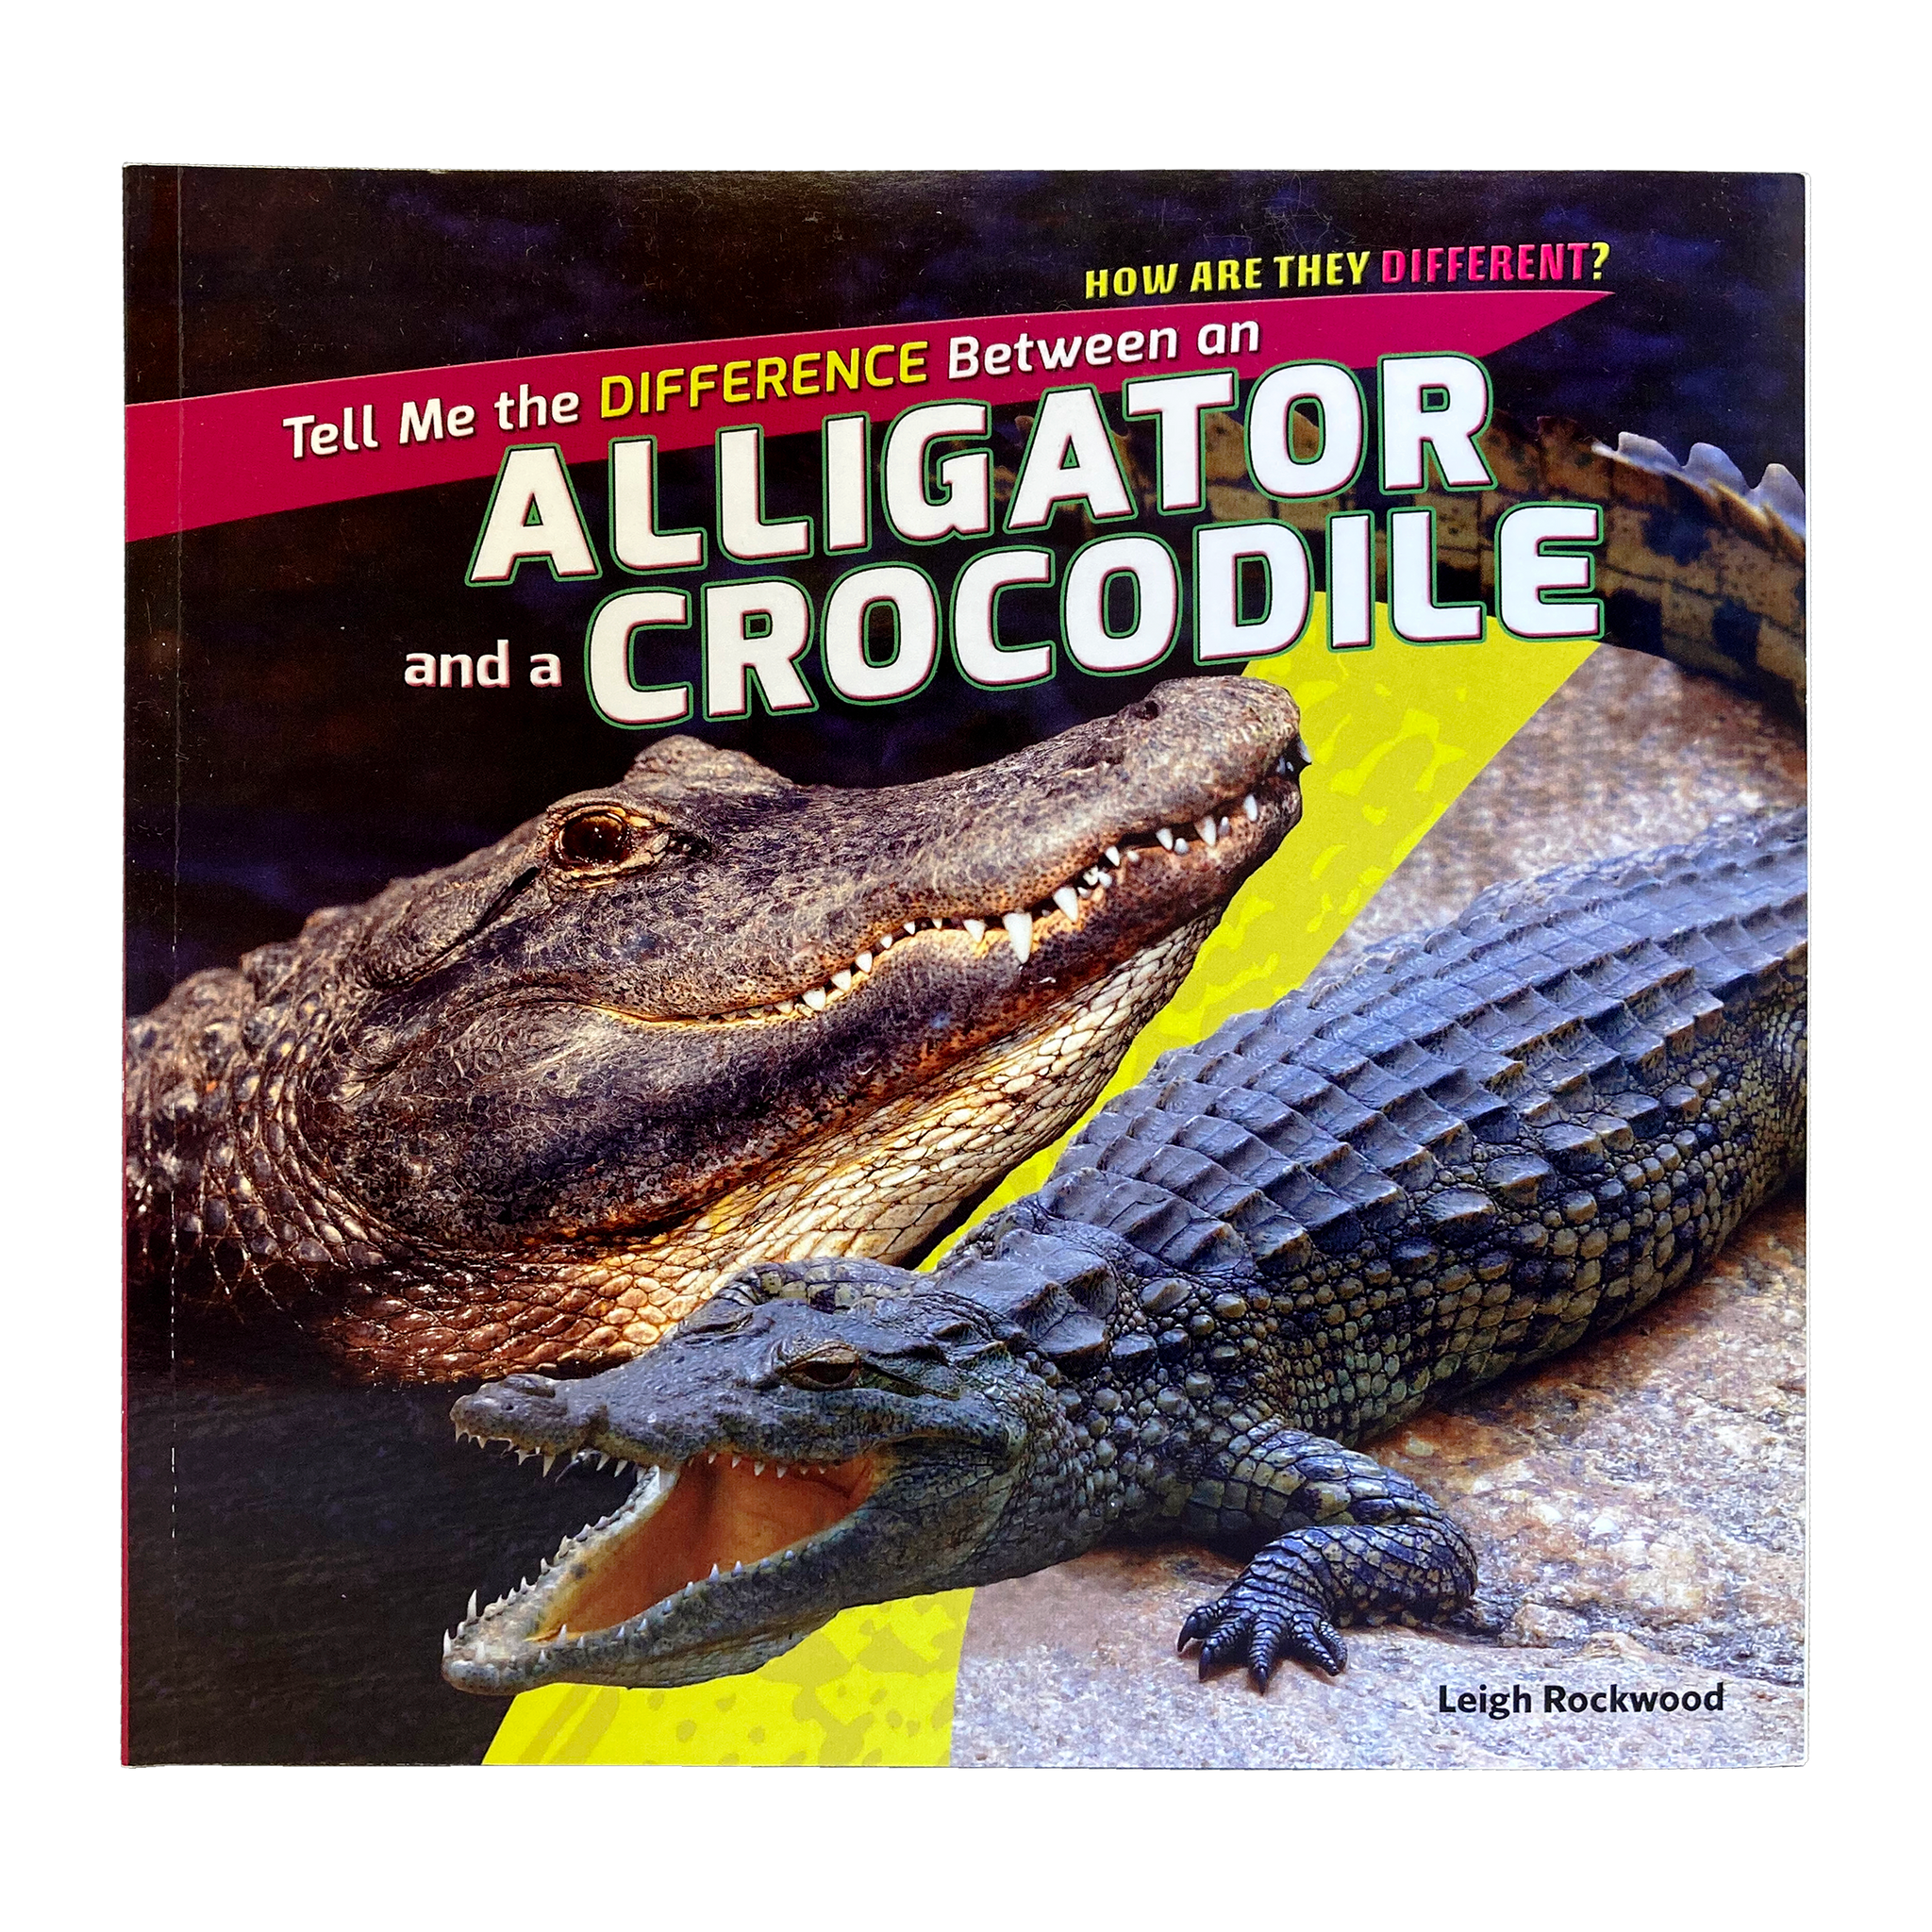 Tell Me The Difference Between an Alligator and a Crocodile